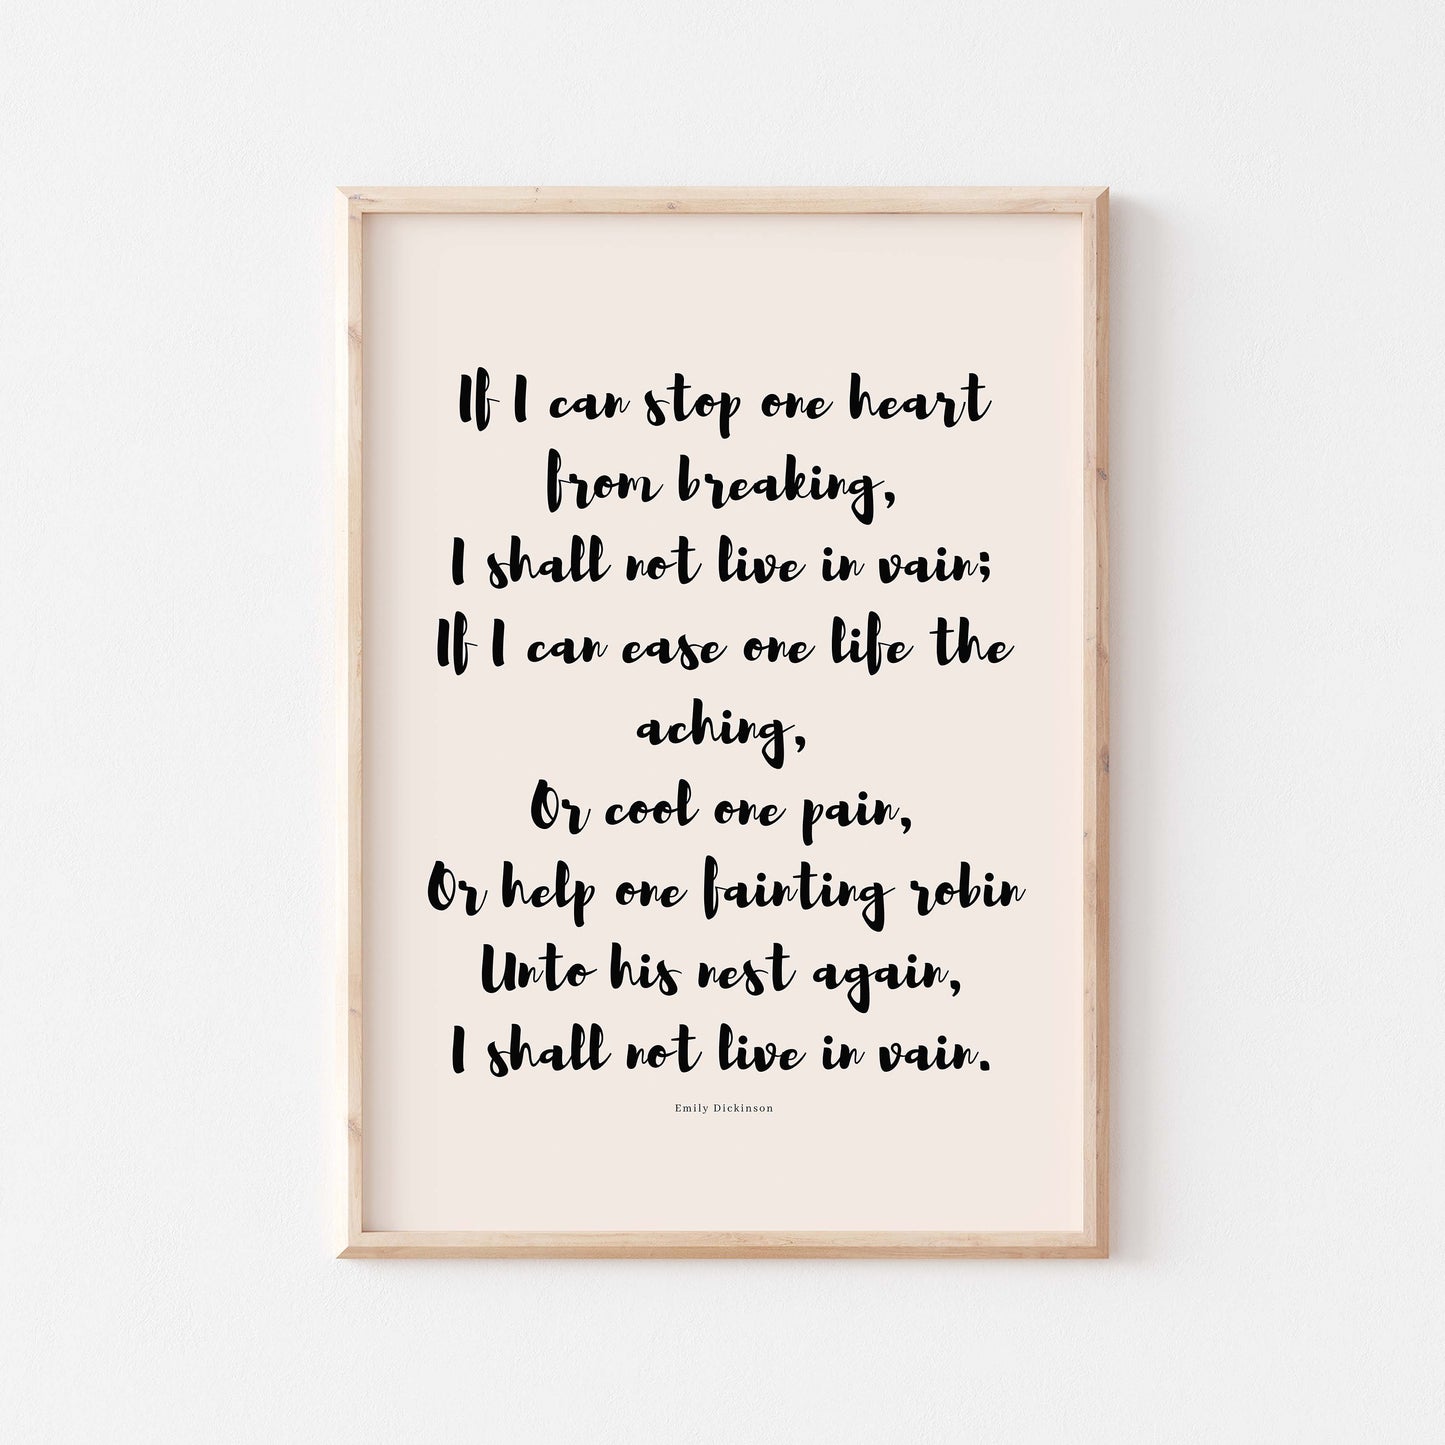 Emily Dickinson&#39;s &#39;If I Can Stop One Heart From Breaking&#39; poem print in wood frame